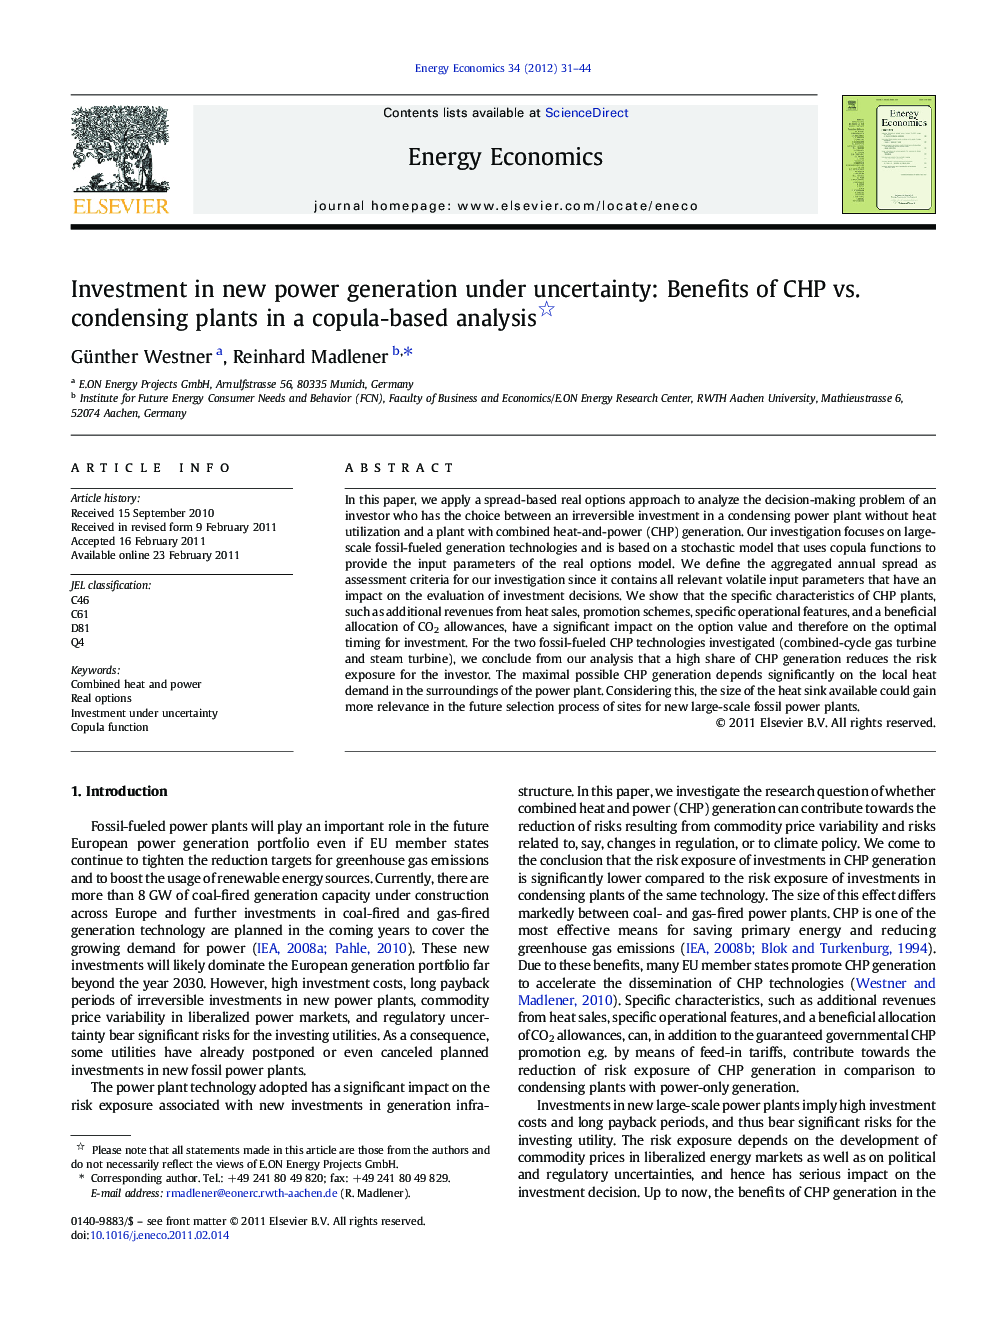 Investment in new power generation under uncertainty: Benefits of CHP vs. condensing plants in a copula-based analysis